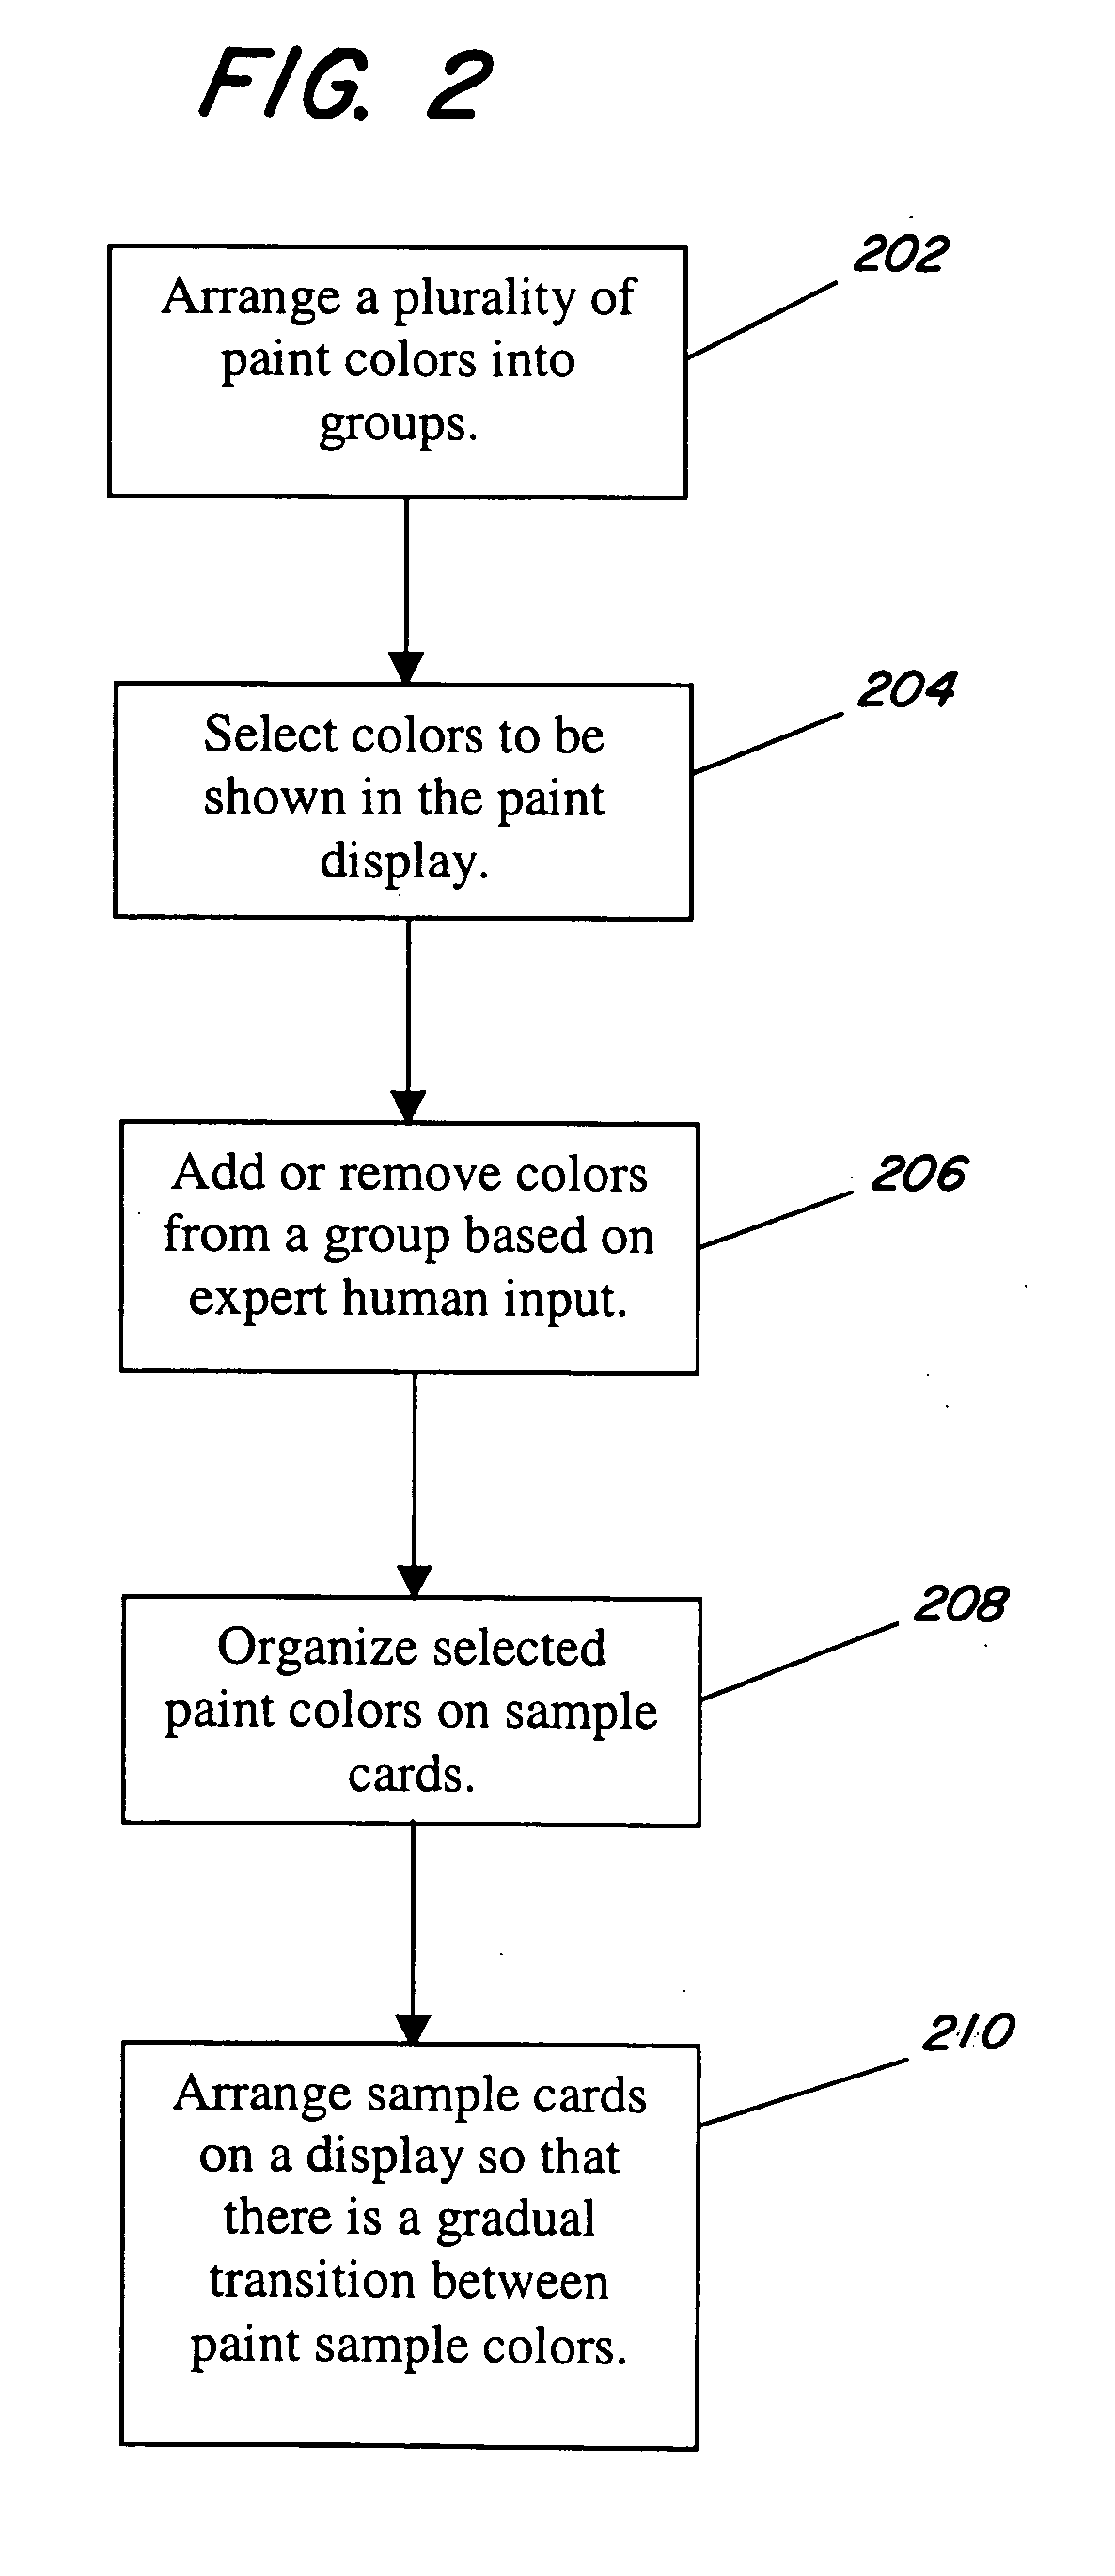 Method and system for arranging a paint color display